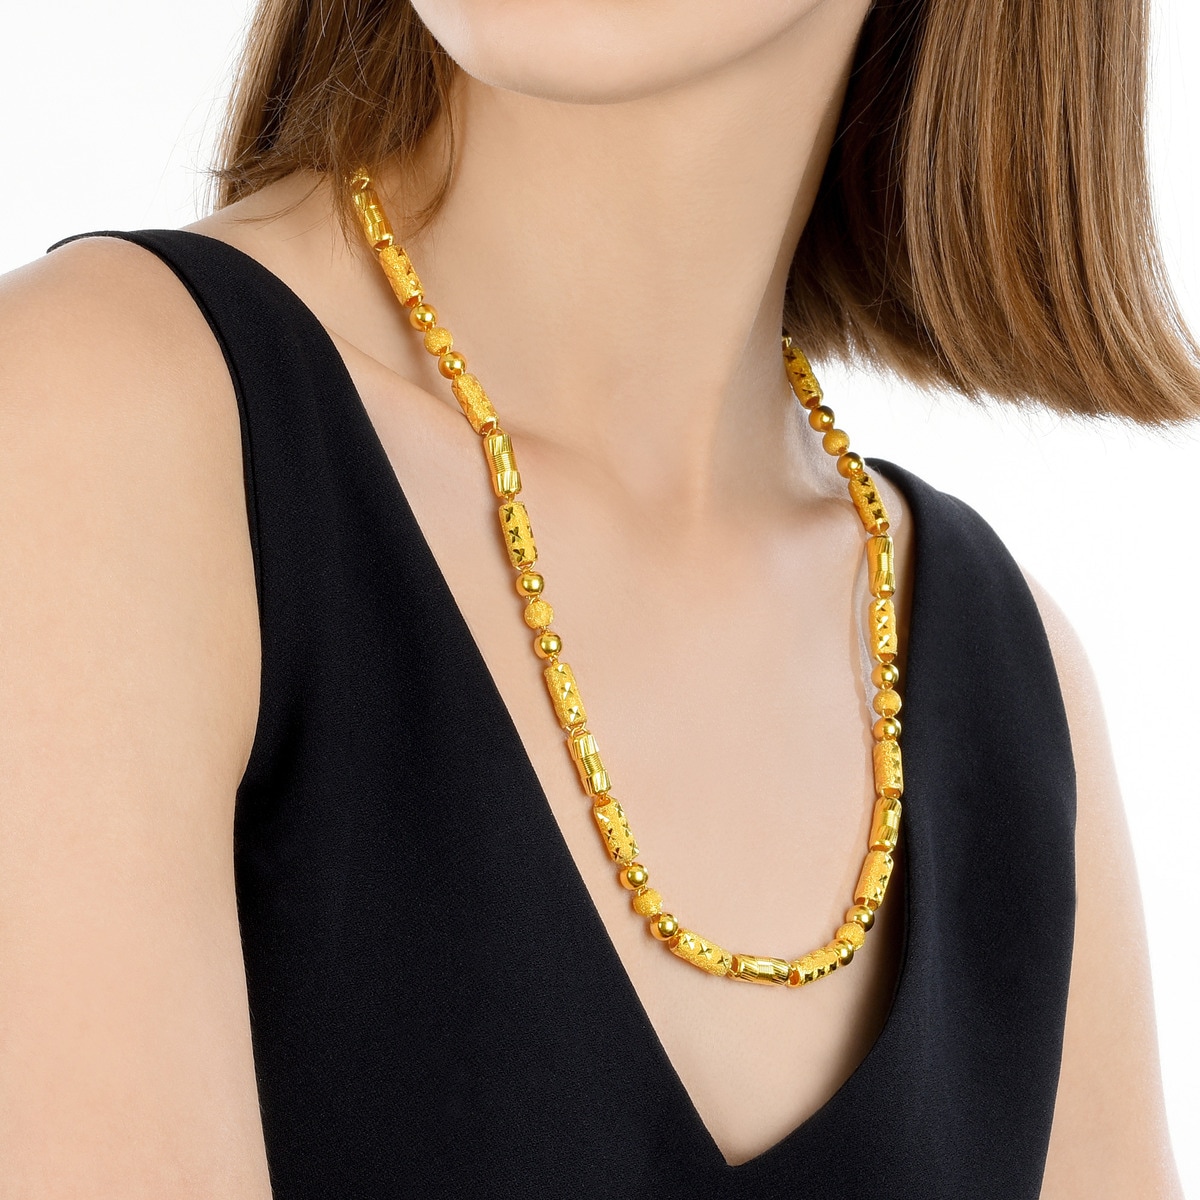 999.9 Gold Necklace | Chow Sang Sang Jewellery eShop